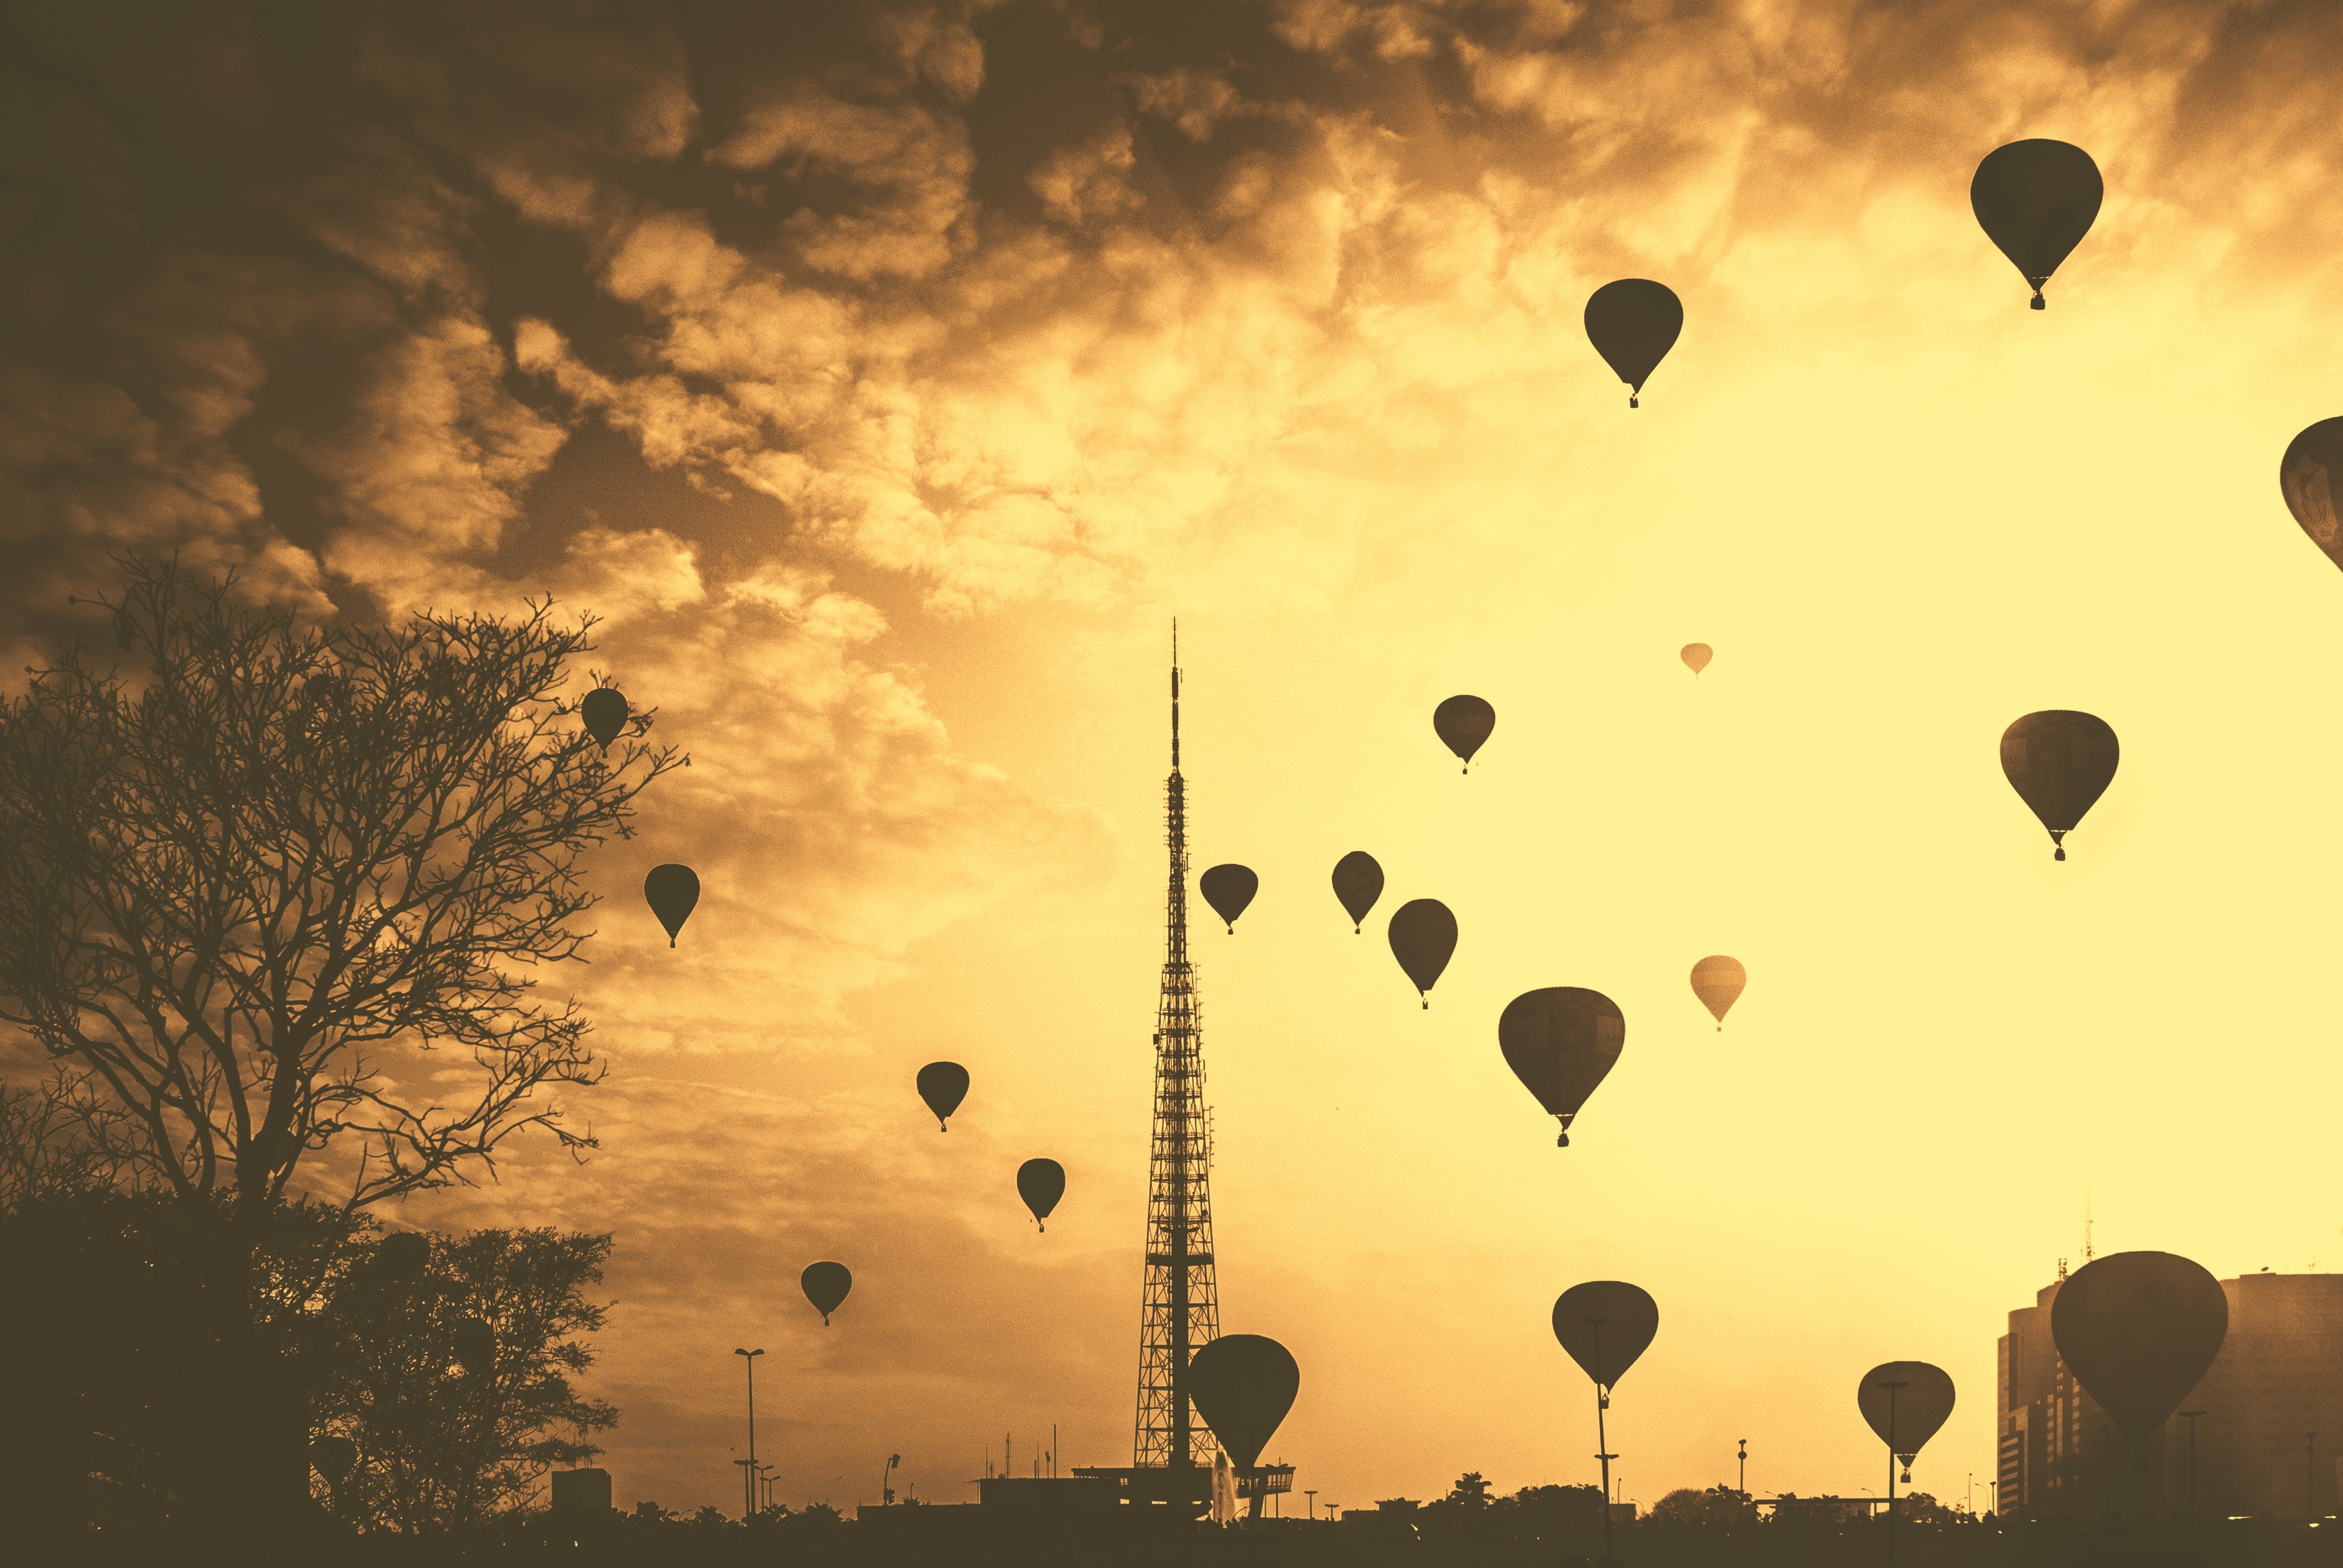 hot Air Balloons, Clouds, Nature, City, Trees, Silhouette, Contrast, Industrial, Cityscape, Sky, Sepia Wallpaper